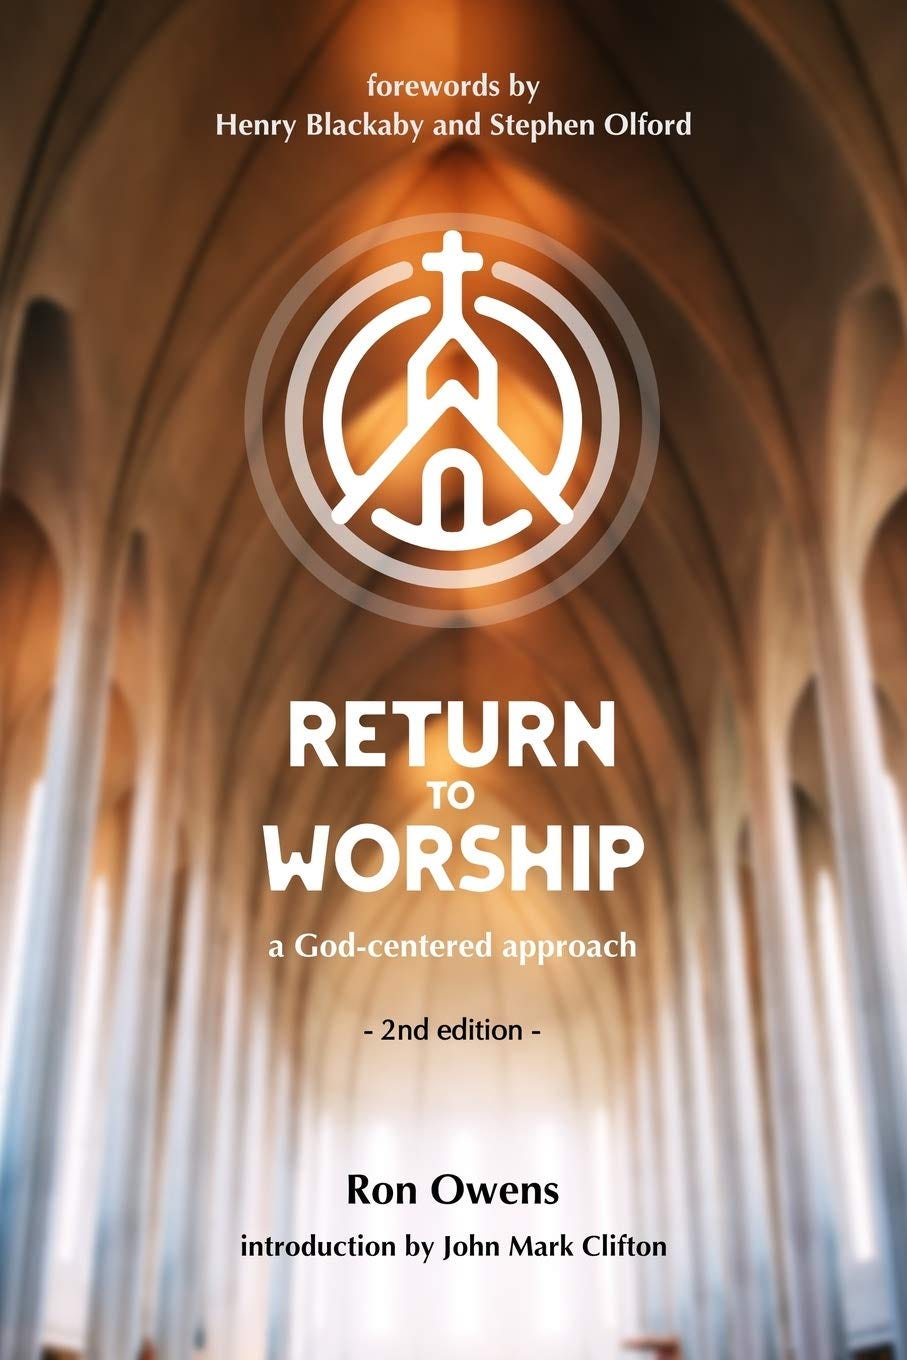 Image of book cover for Return to Worship by Ron Owens.